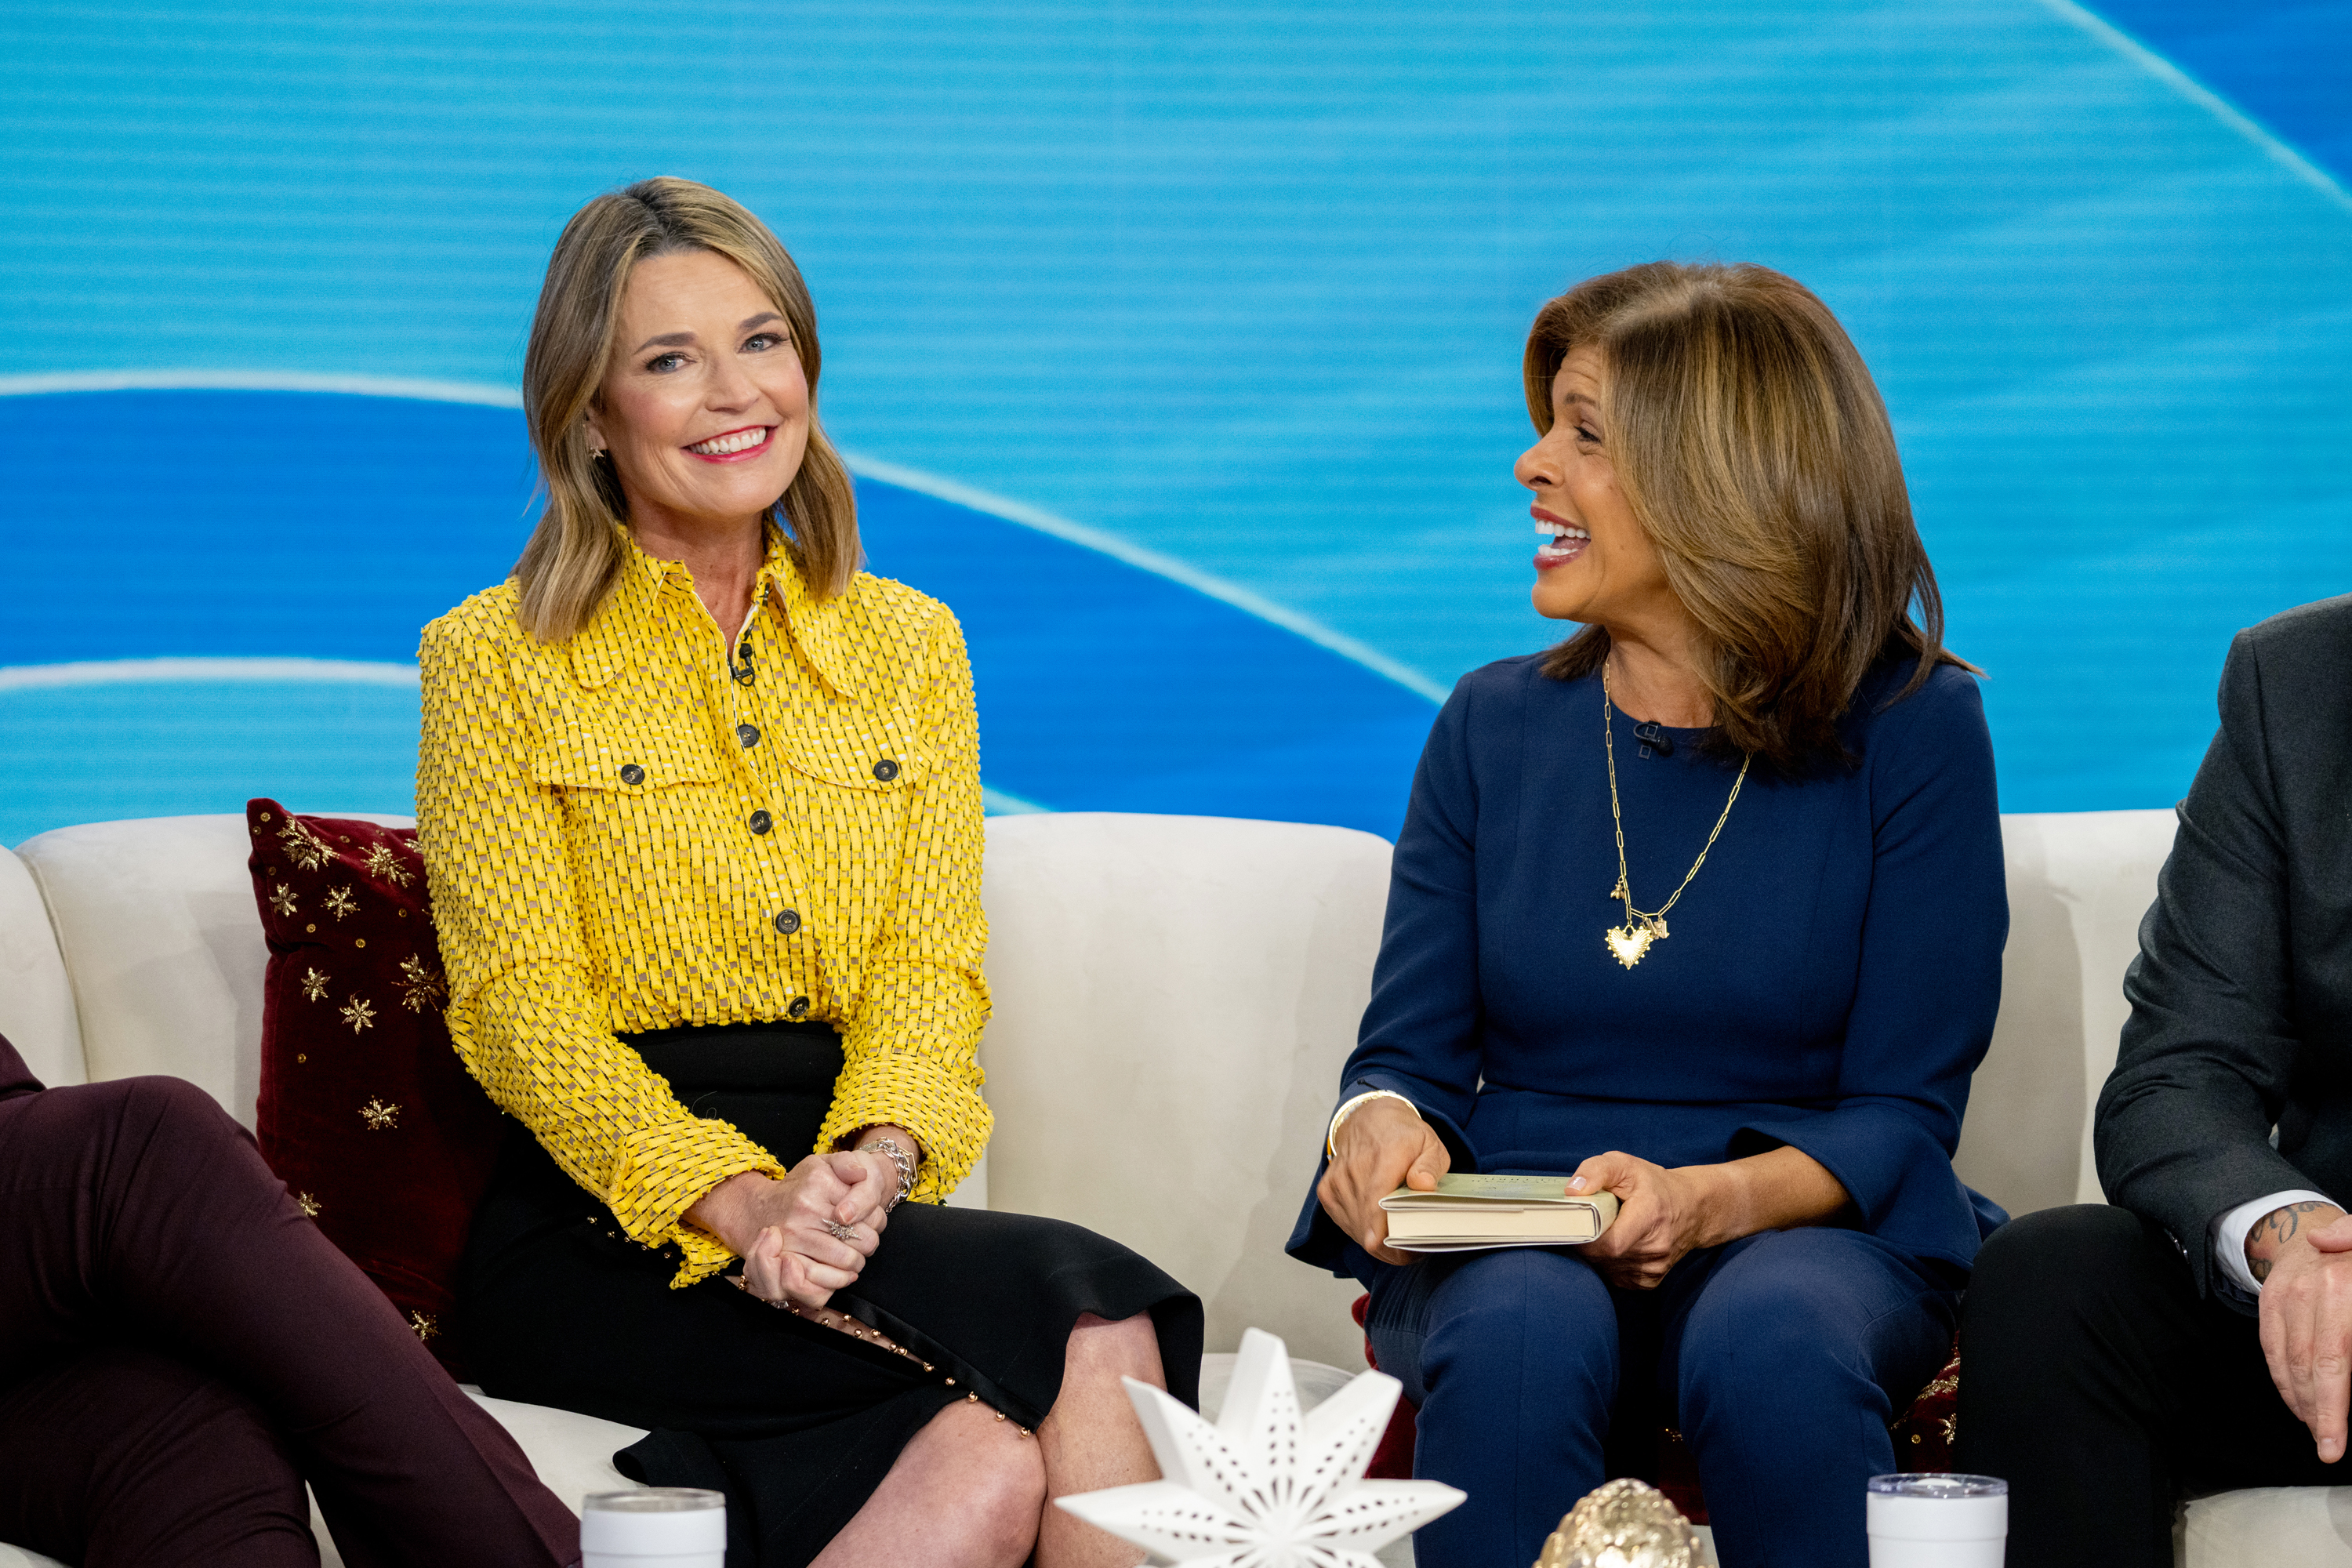 Unfortunately, both Hoda and Savannah were away on holiday break at the time